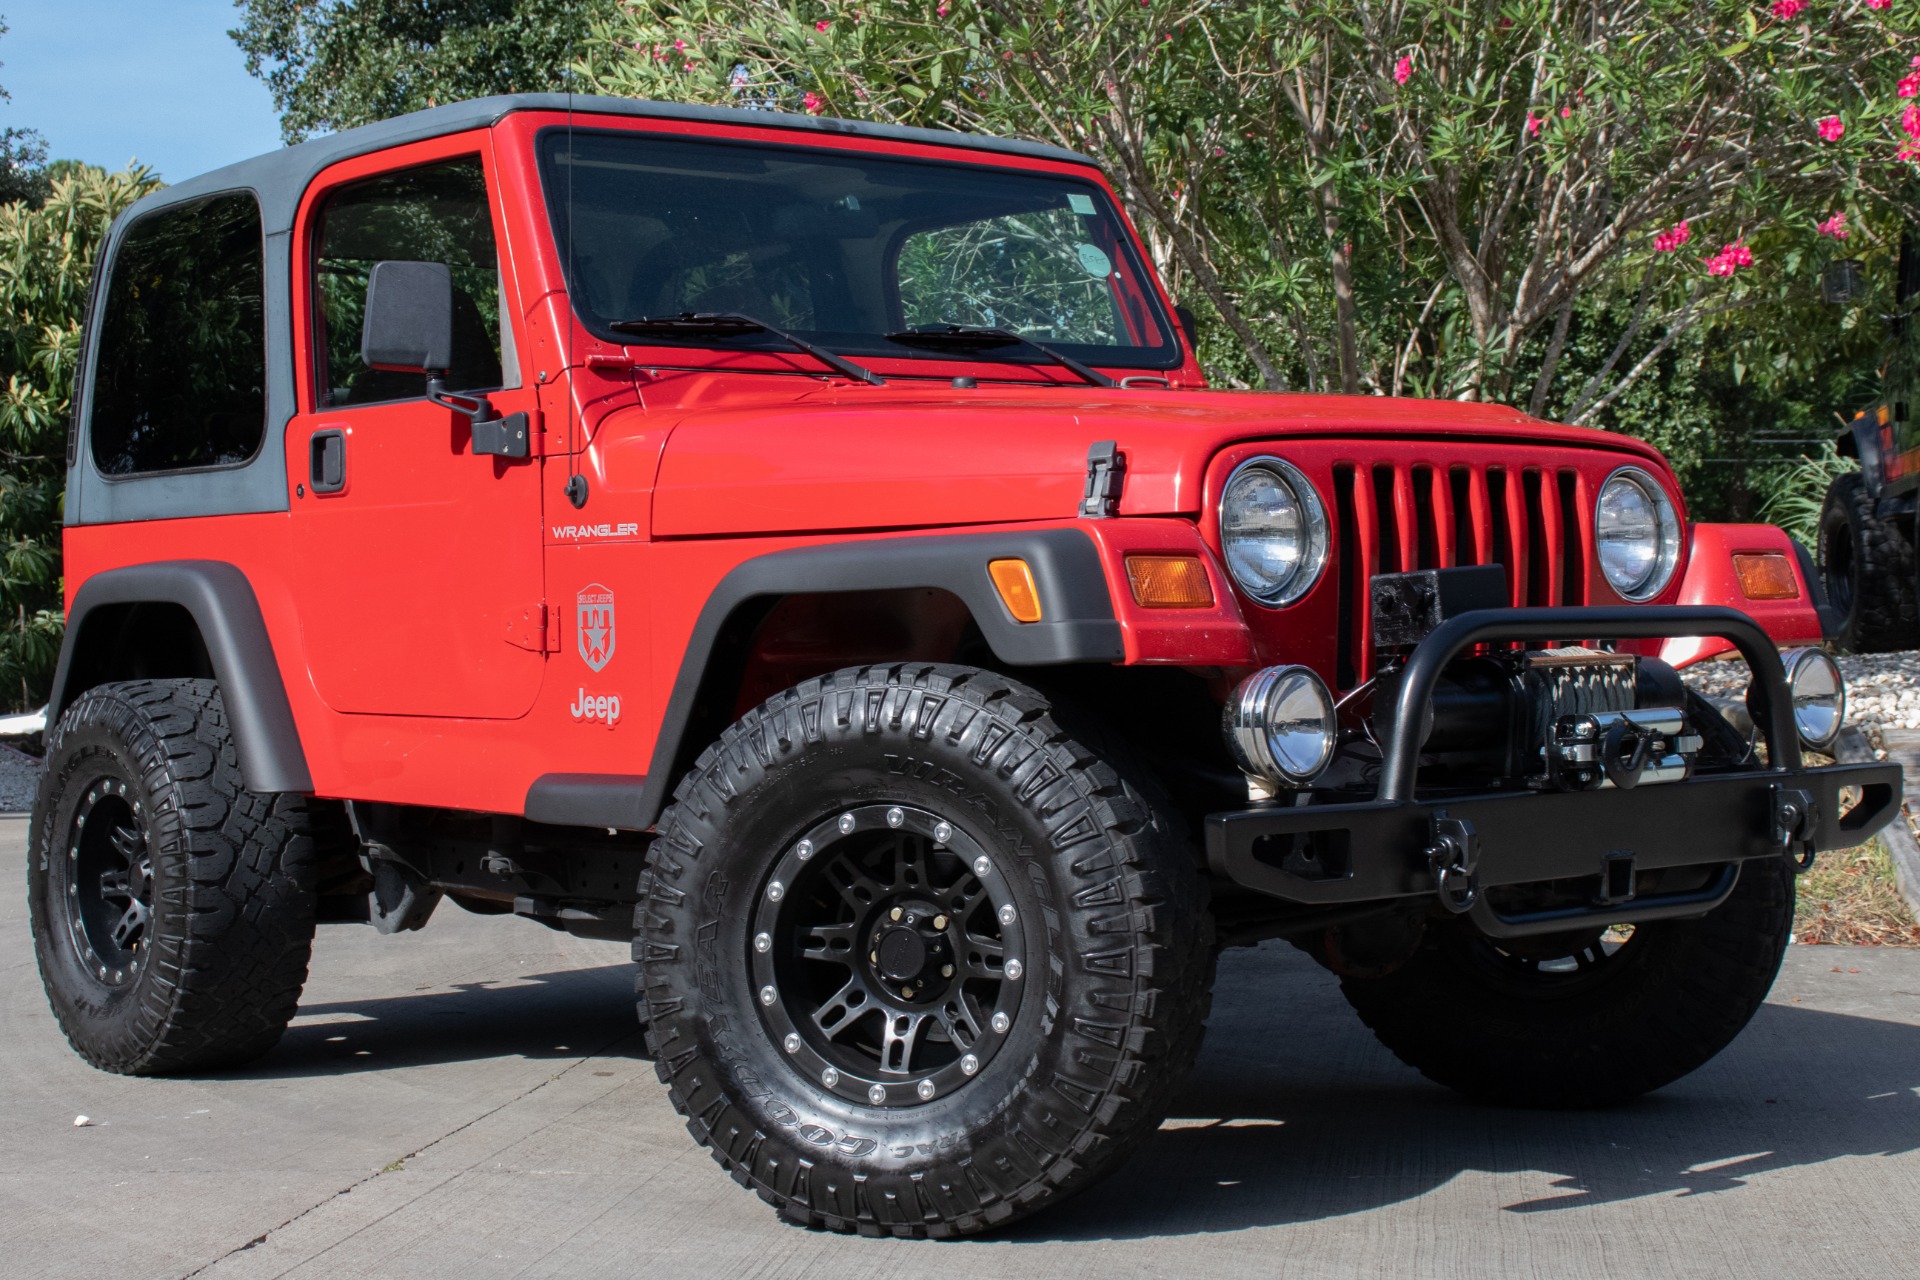 Used 1997 Jeep Wrangler SE For Sale ($11,995) | Select Jeeps Inc. Stock  #542585